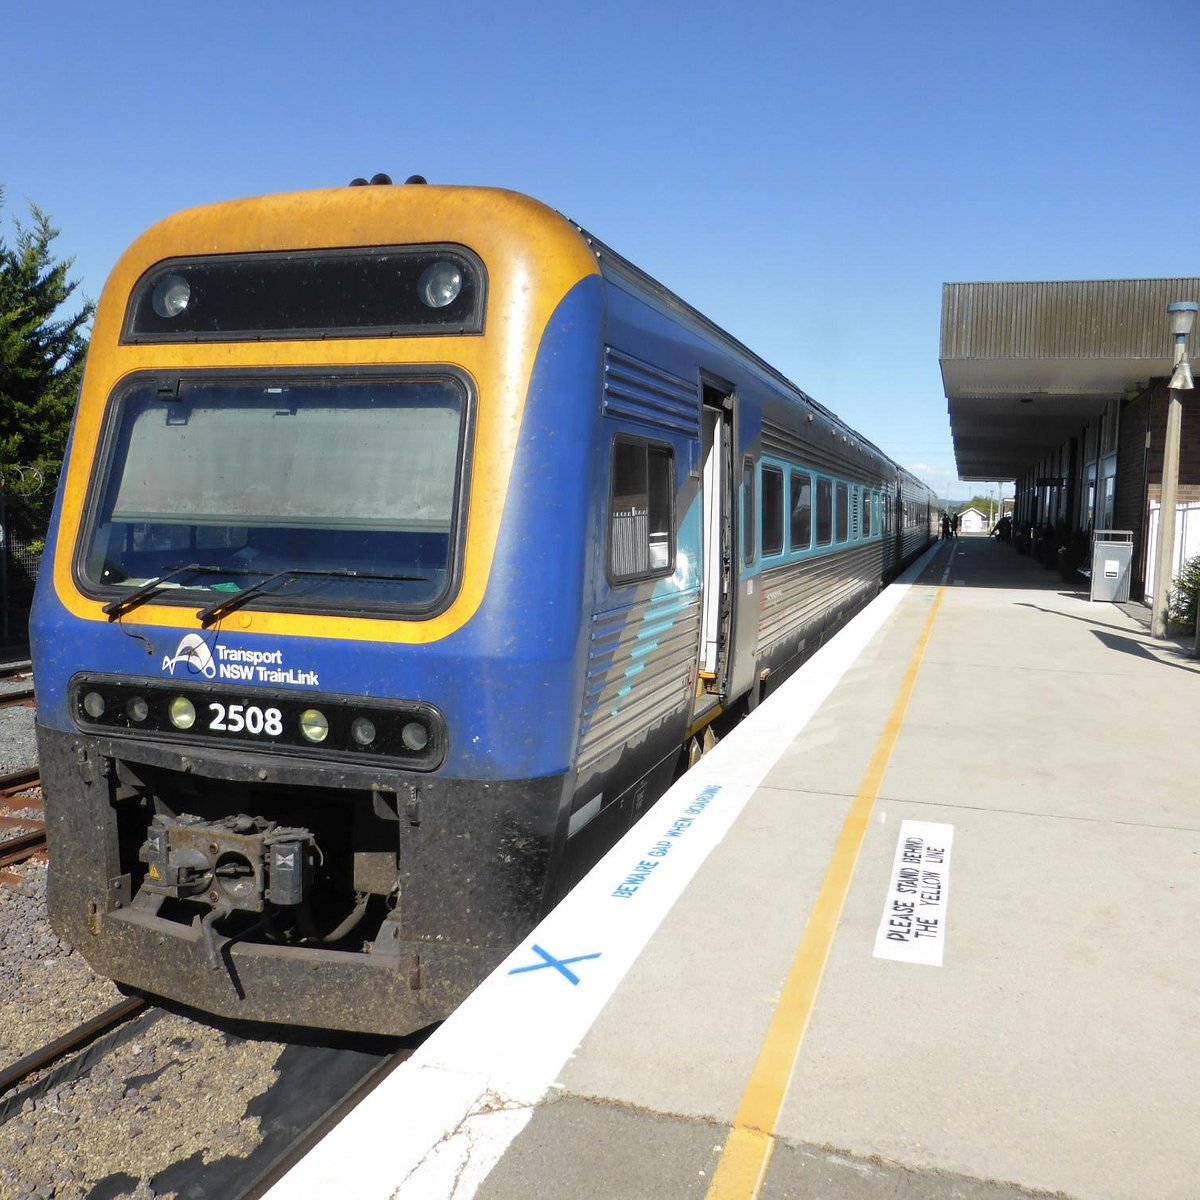 Nsw Trainlink Canberra 2021 All You Need To Know Before You Go With Photos Tripadvisor